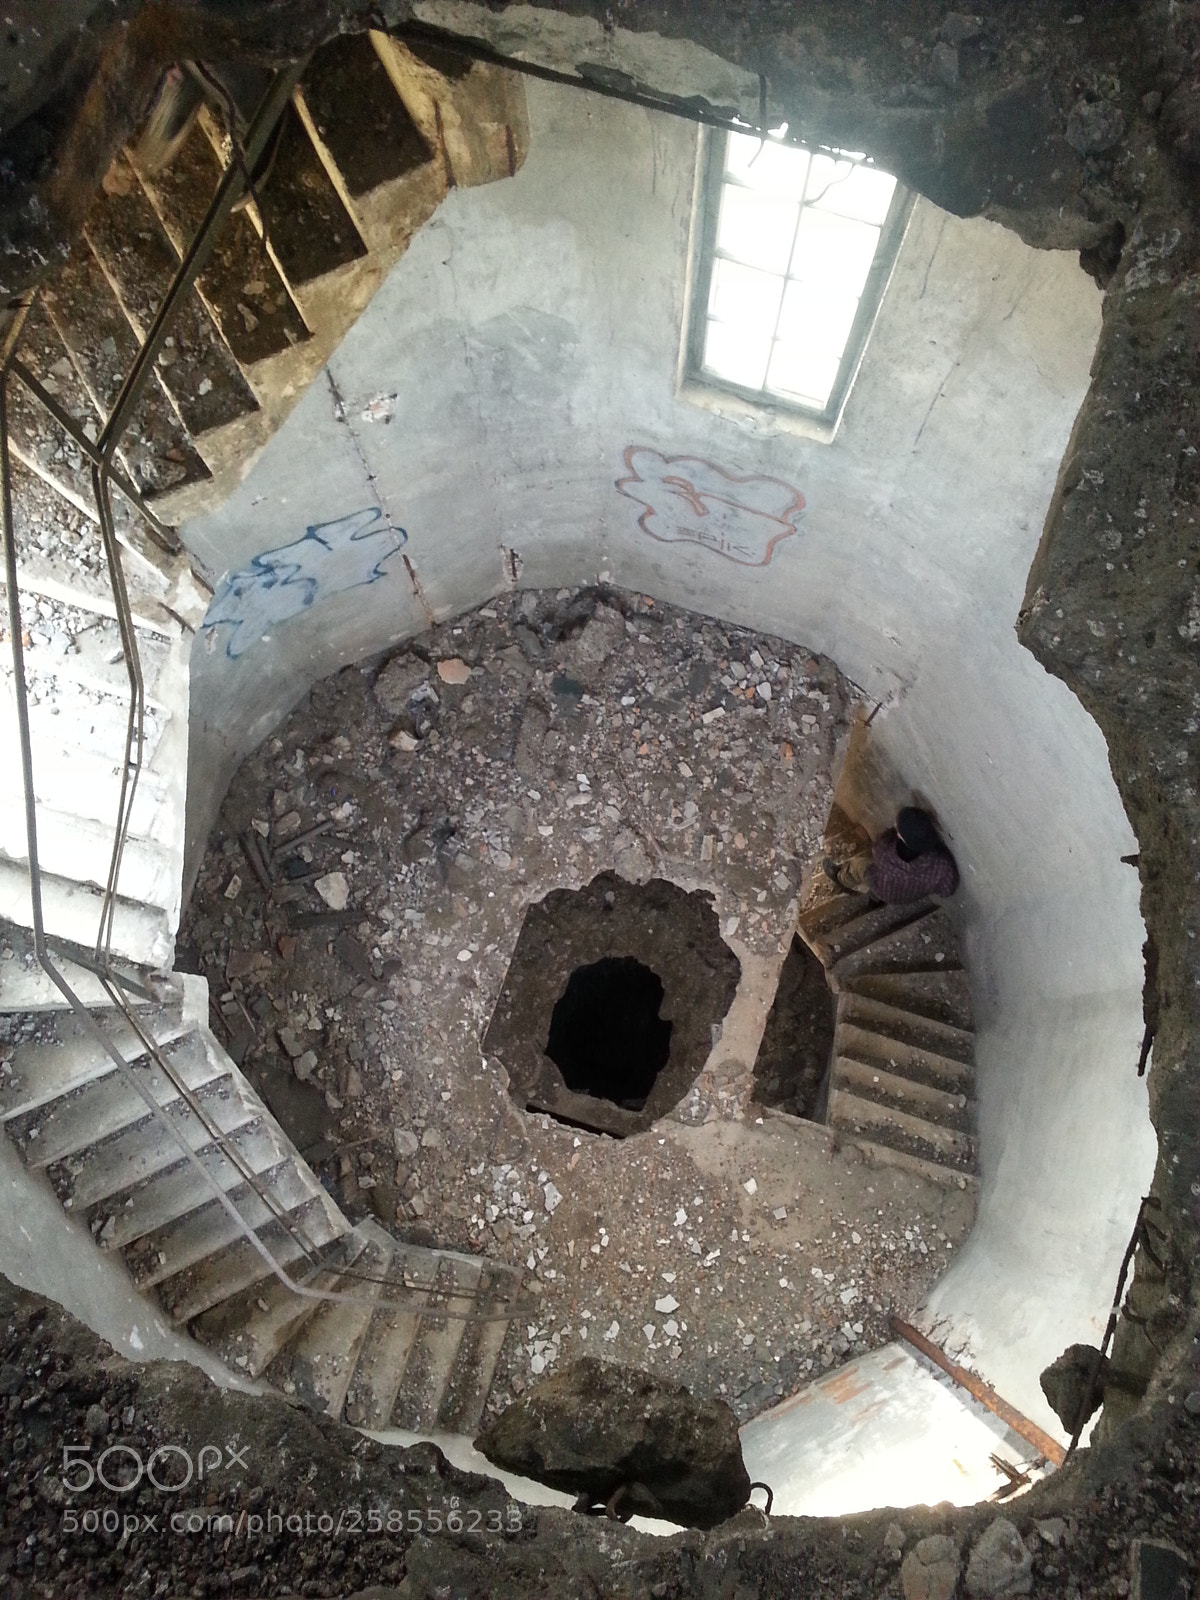 Samsung Galaxy S3 sample photo. Abandoned water tower photography